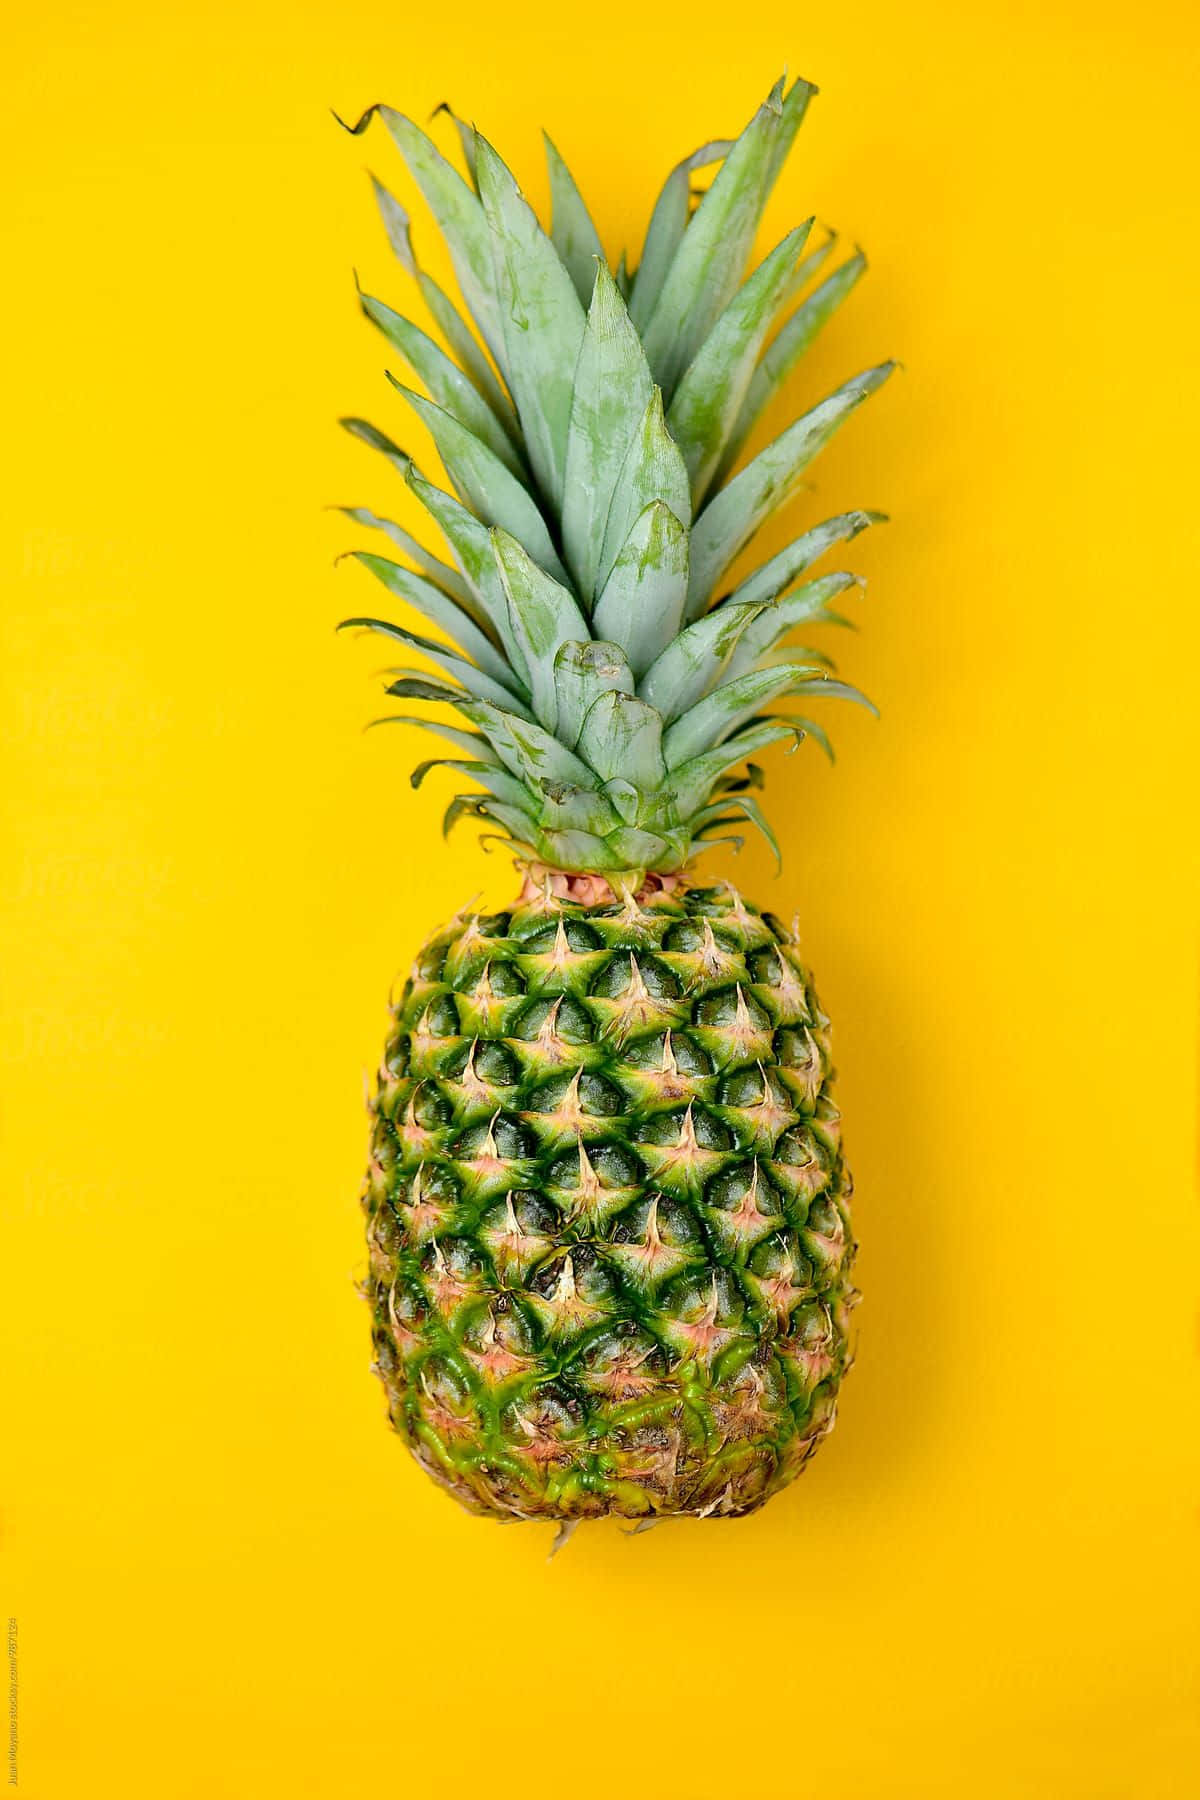 A Pineapple On A Yellow Background